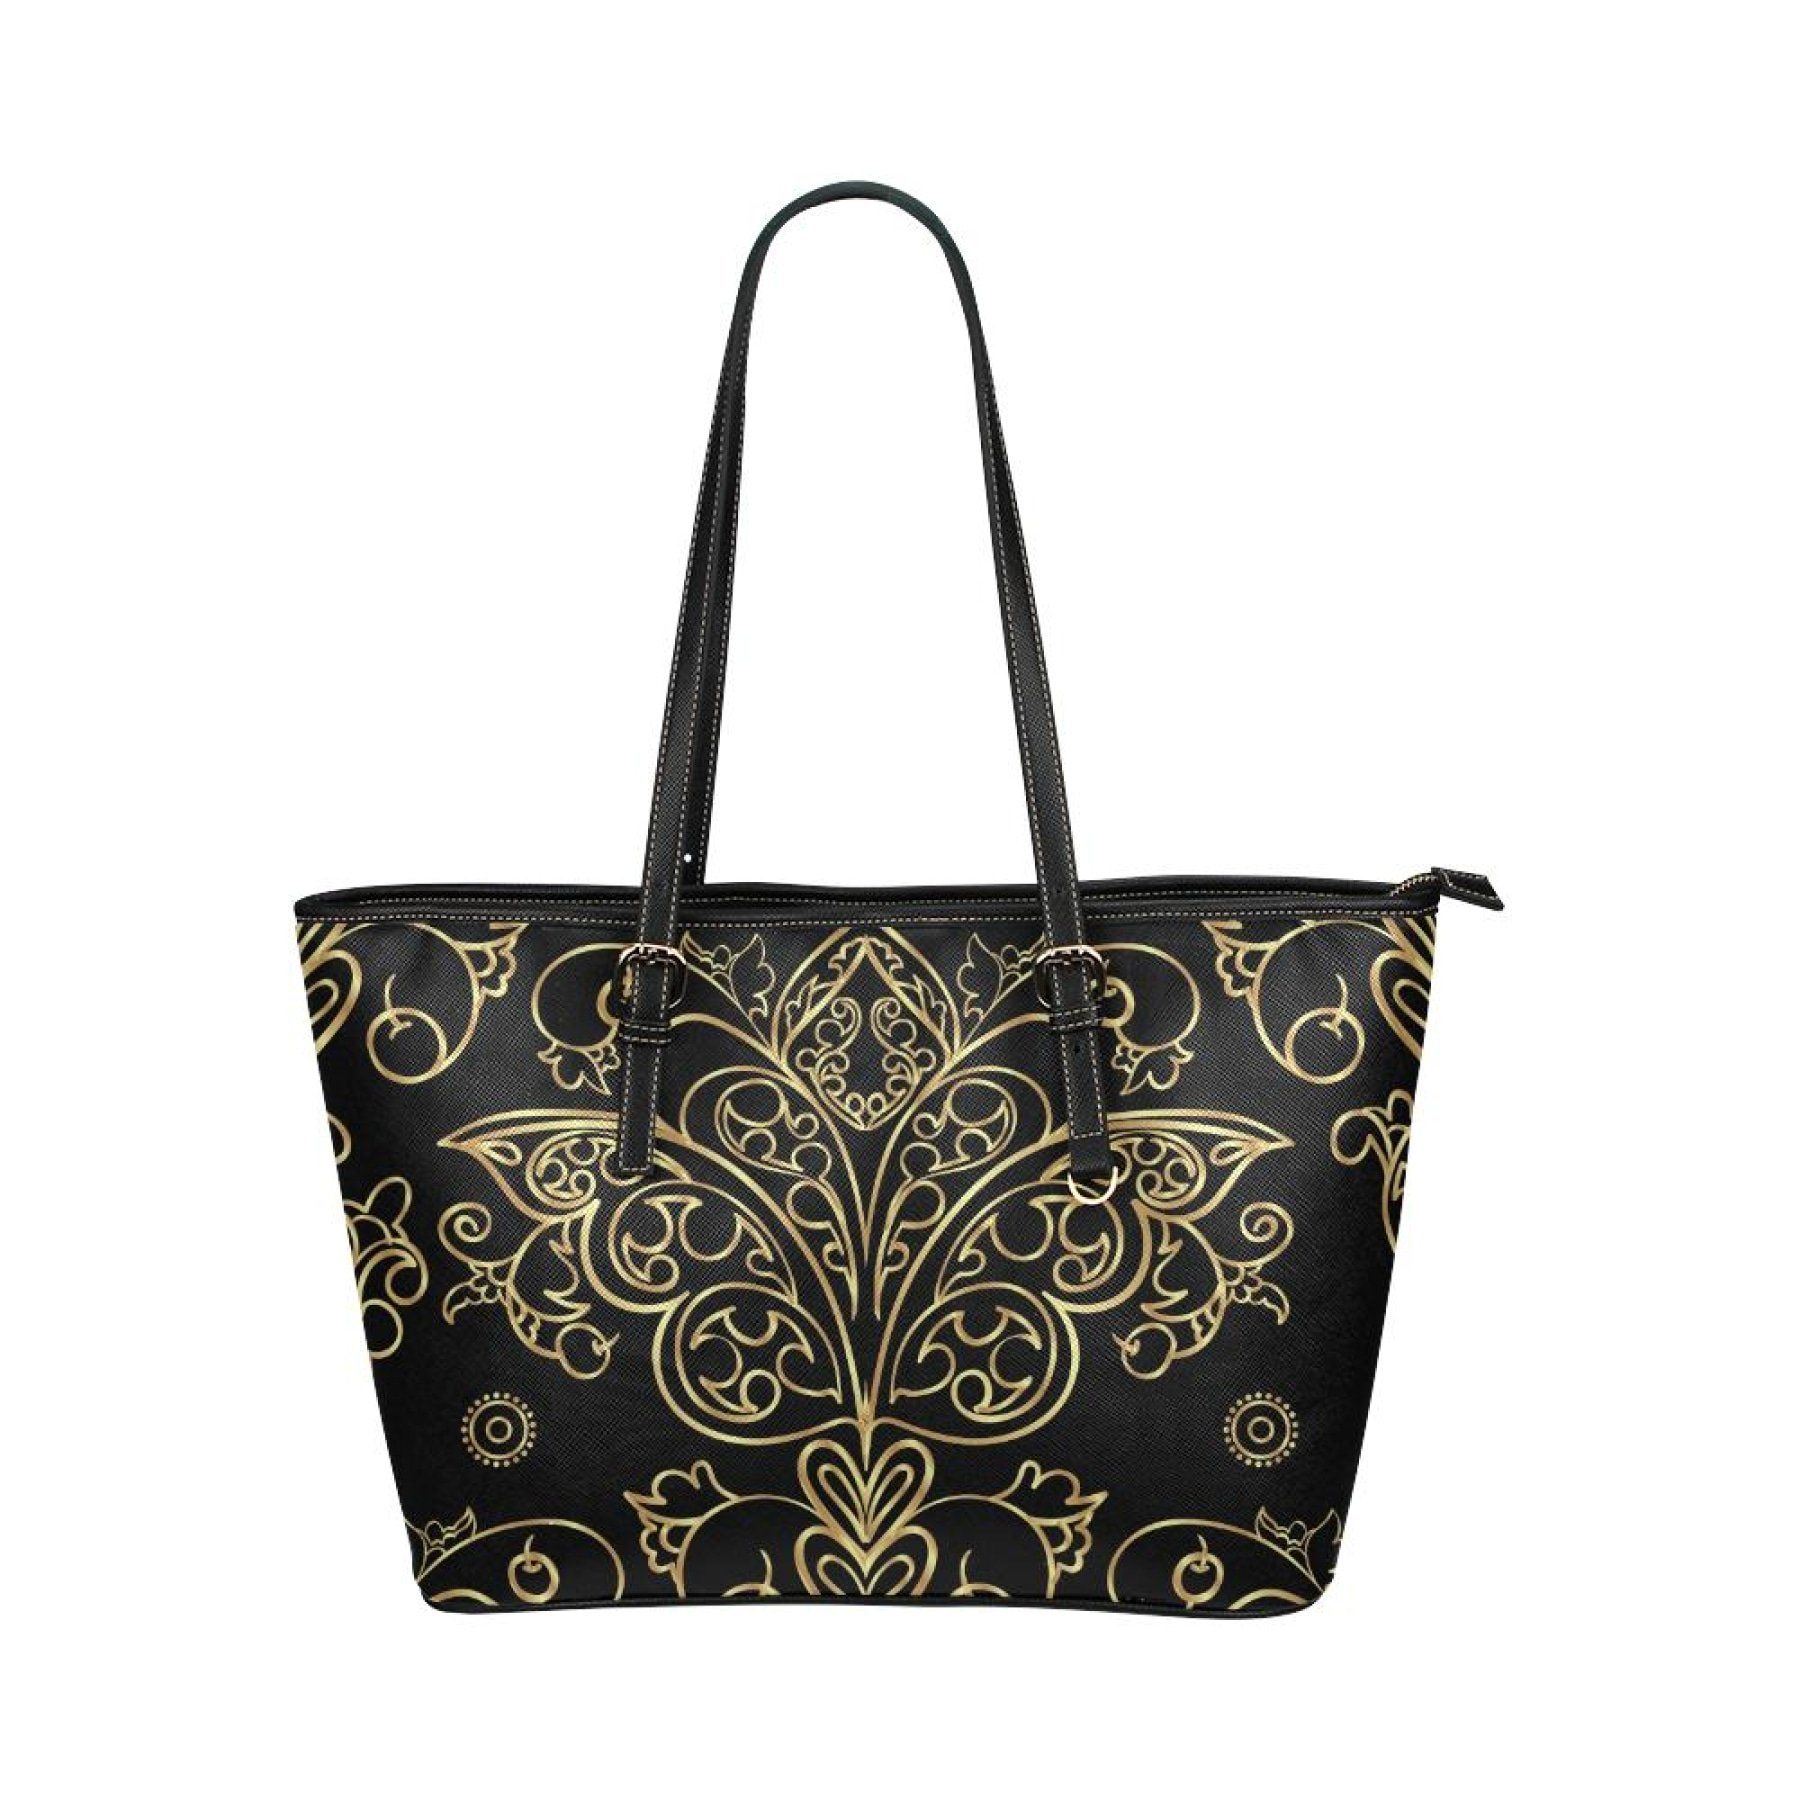 Black And Gold Vintage Butterfly Style Leather Tote Bag 11